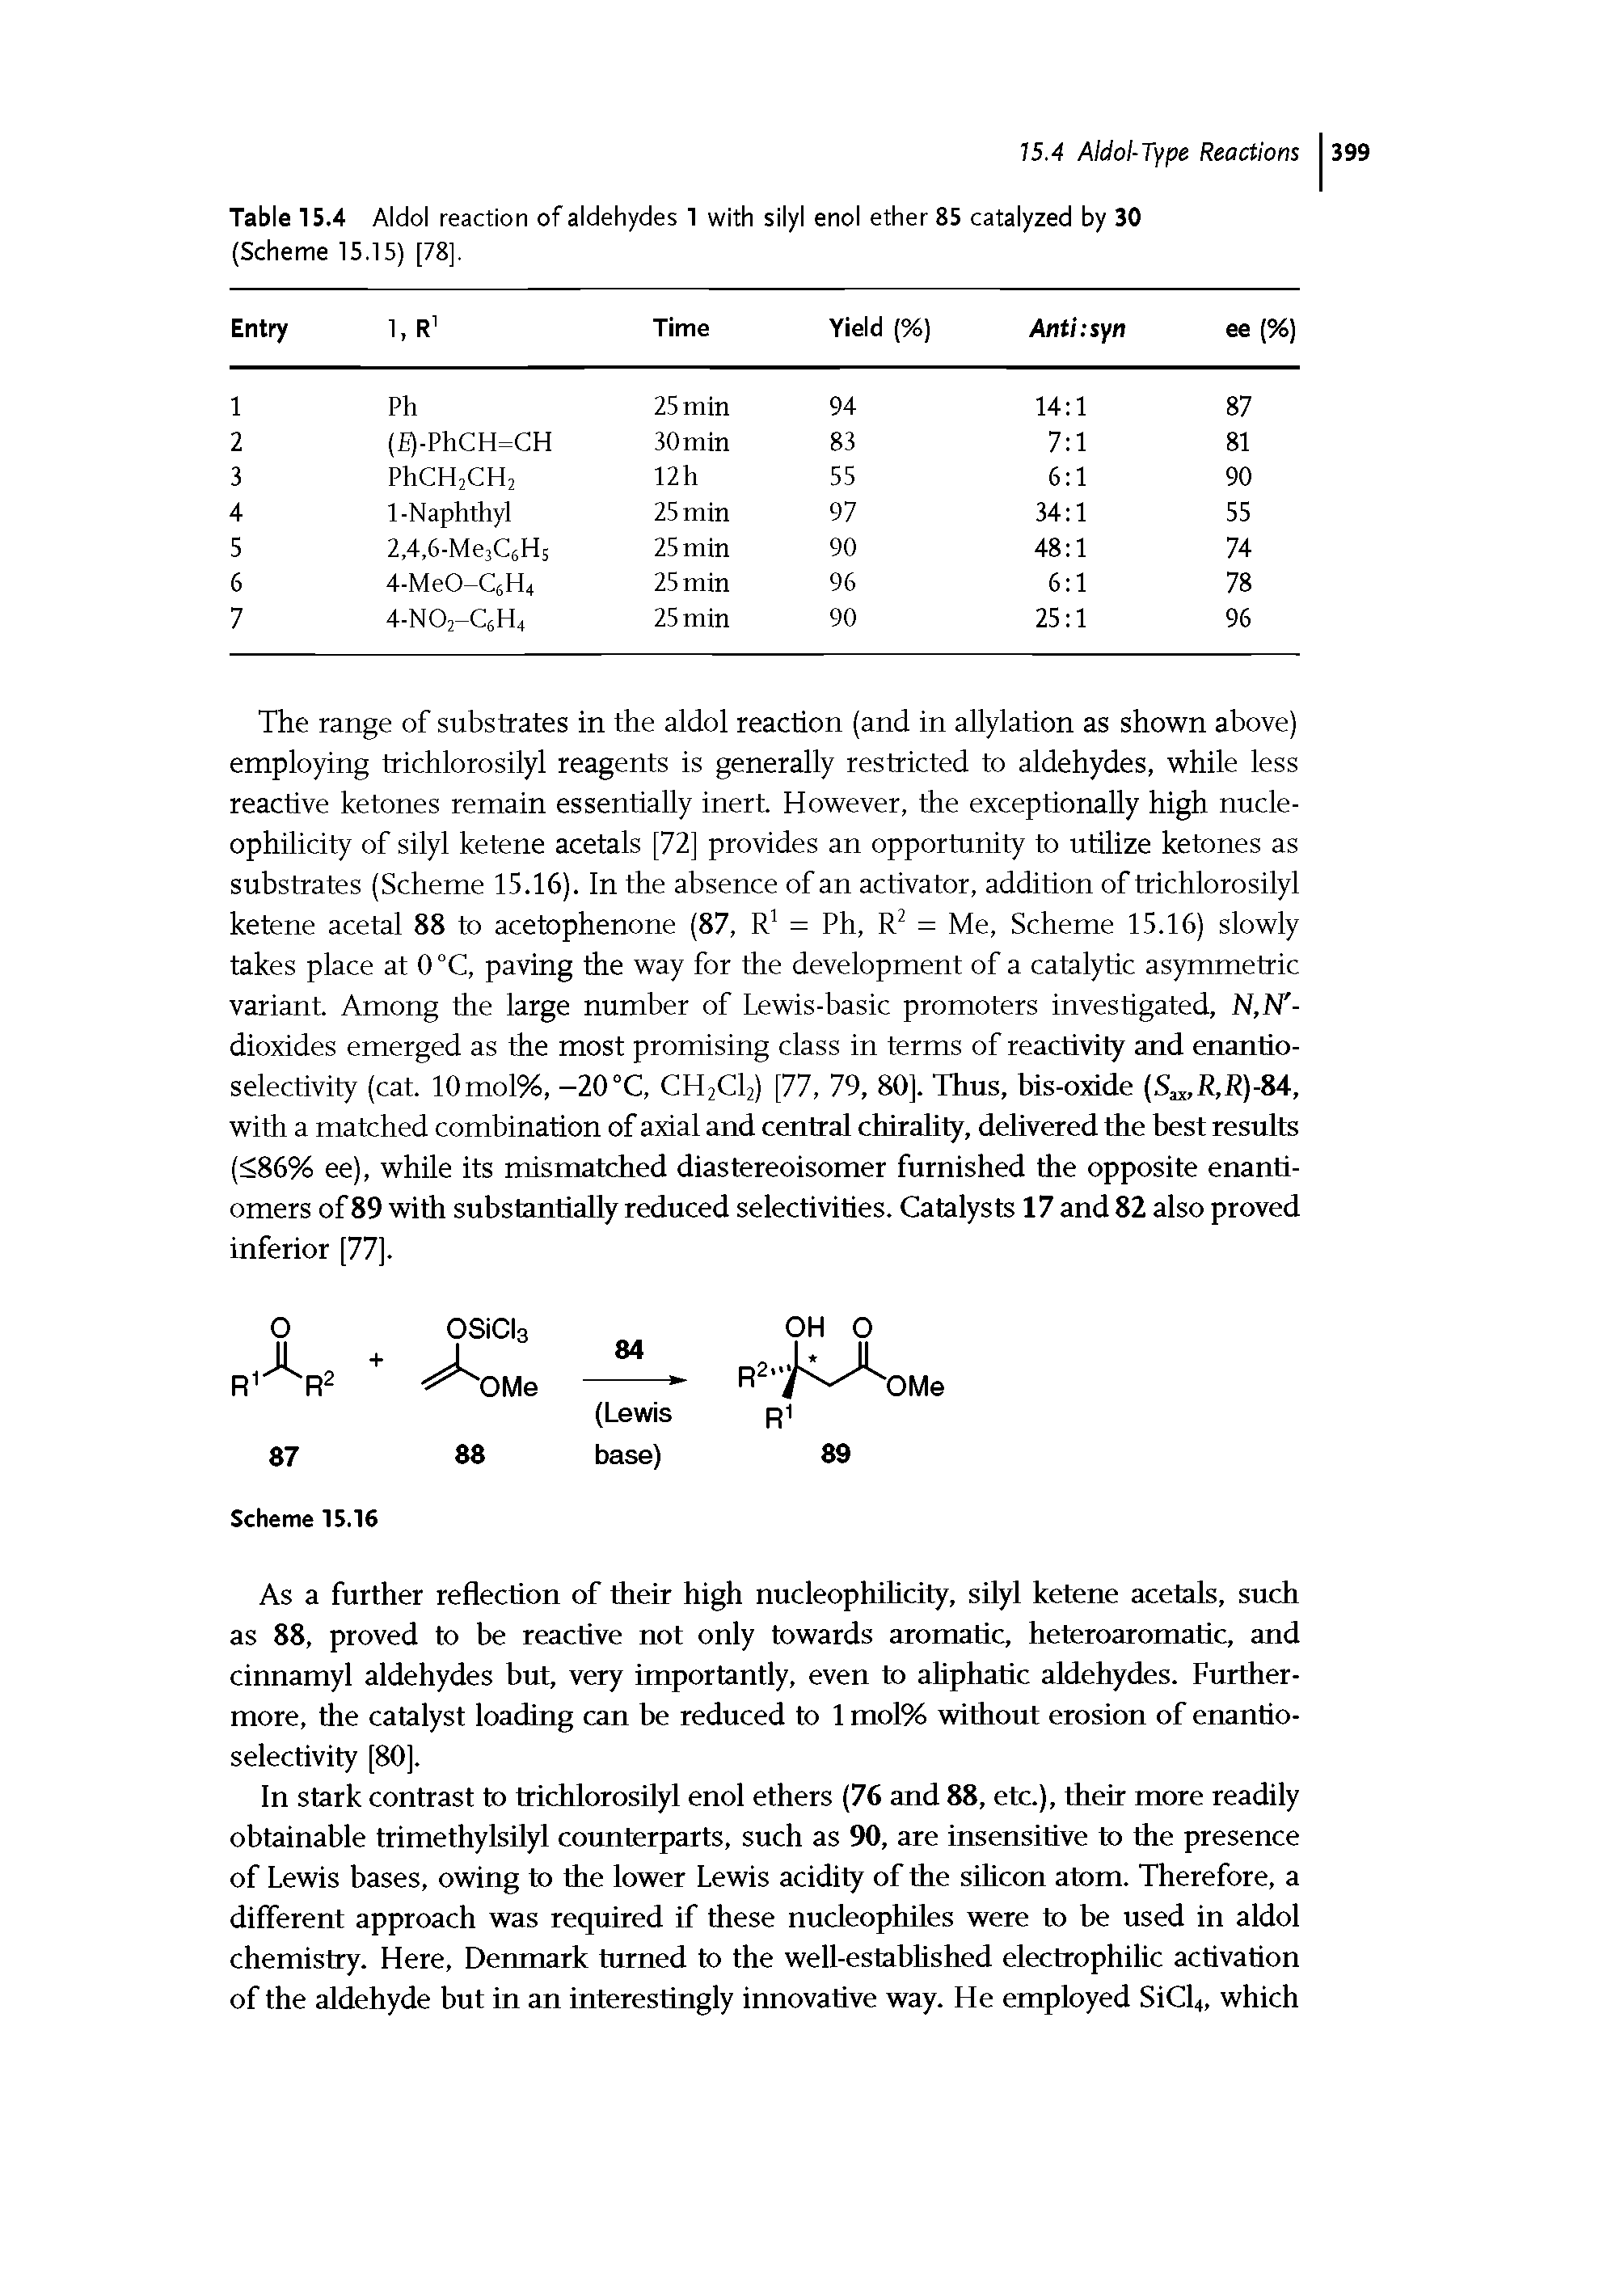 Table 15.4 Aldol reaction of aldehydes 1 with silyl enol ether 85 catalyzed by 30 (Scheme 15.15) [78].